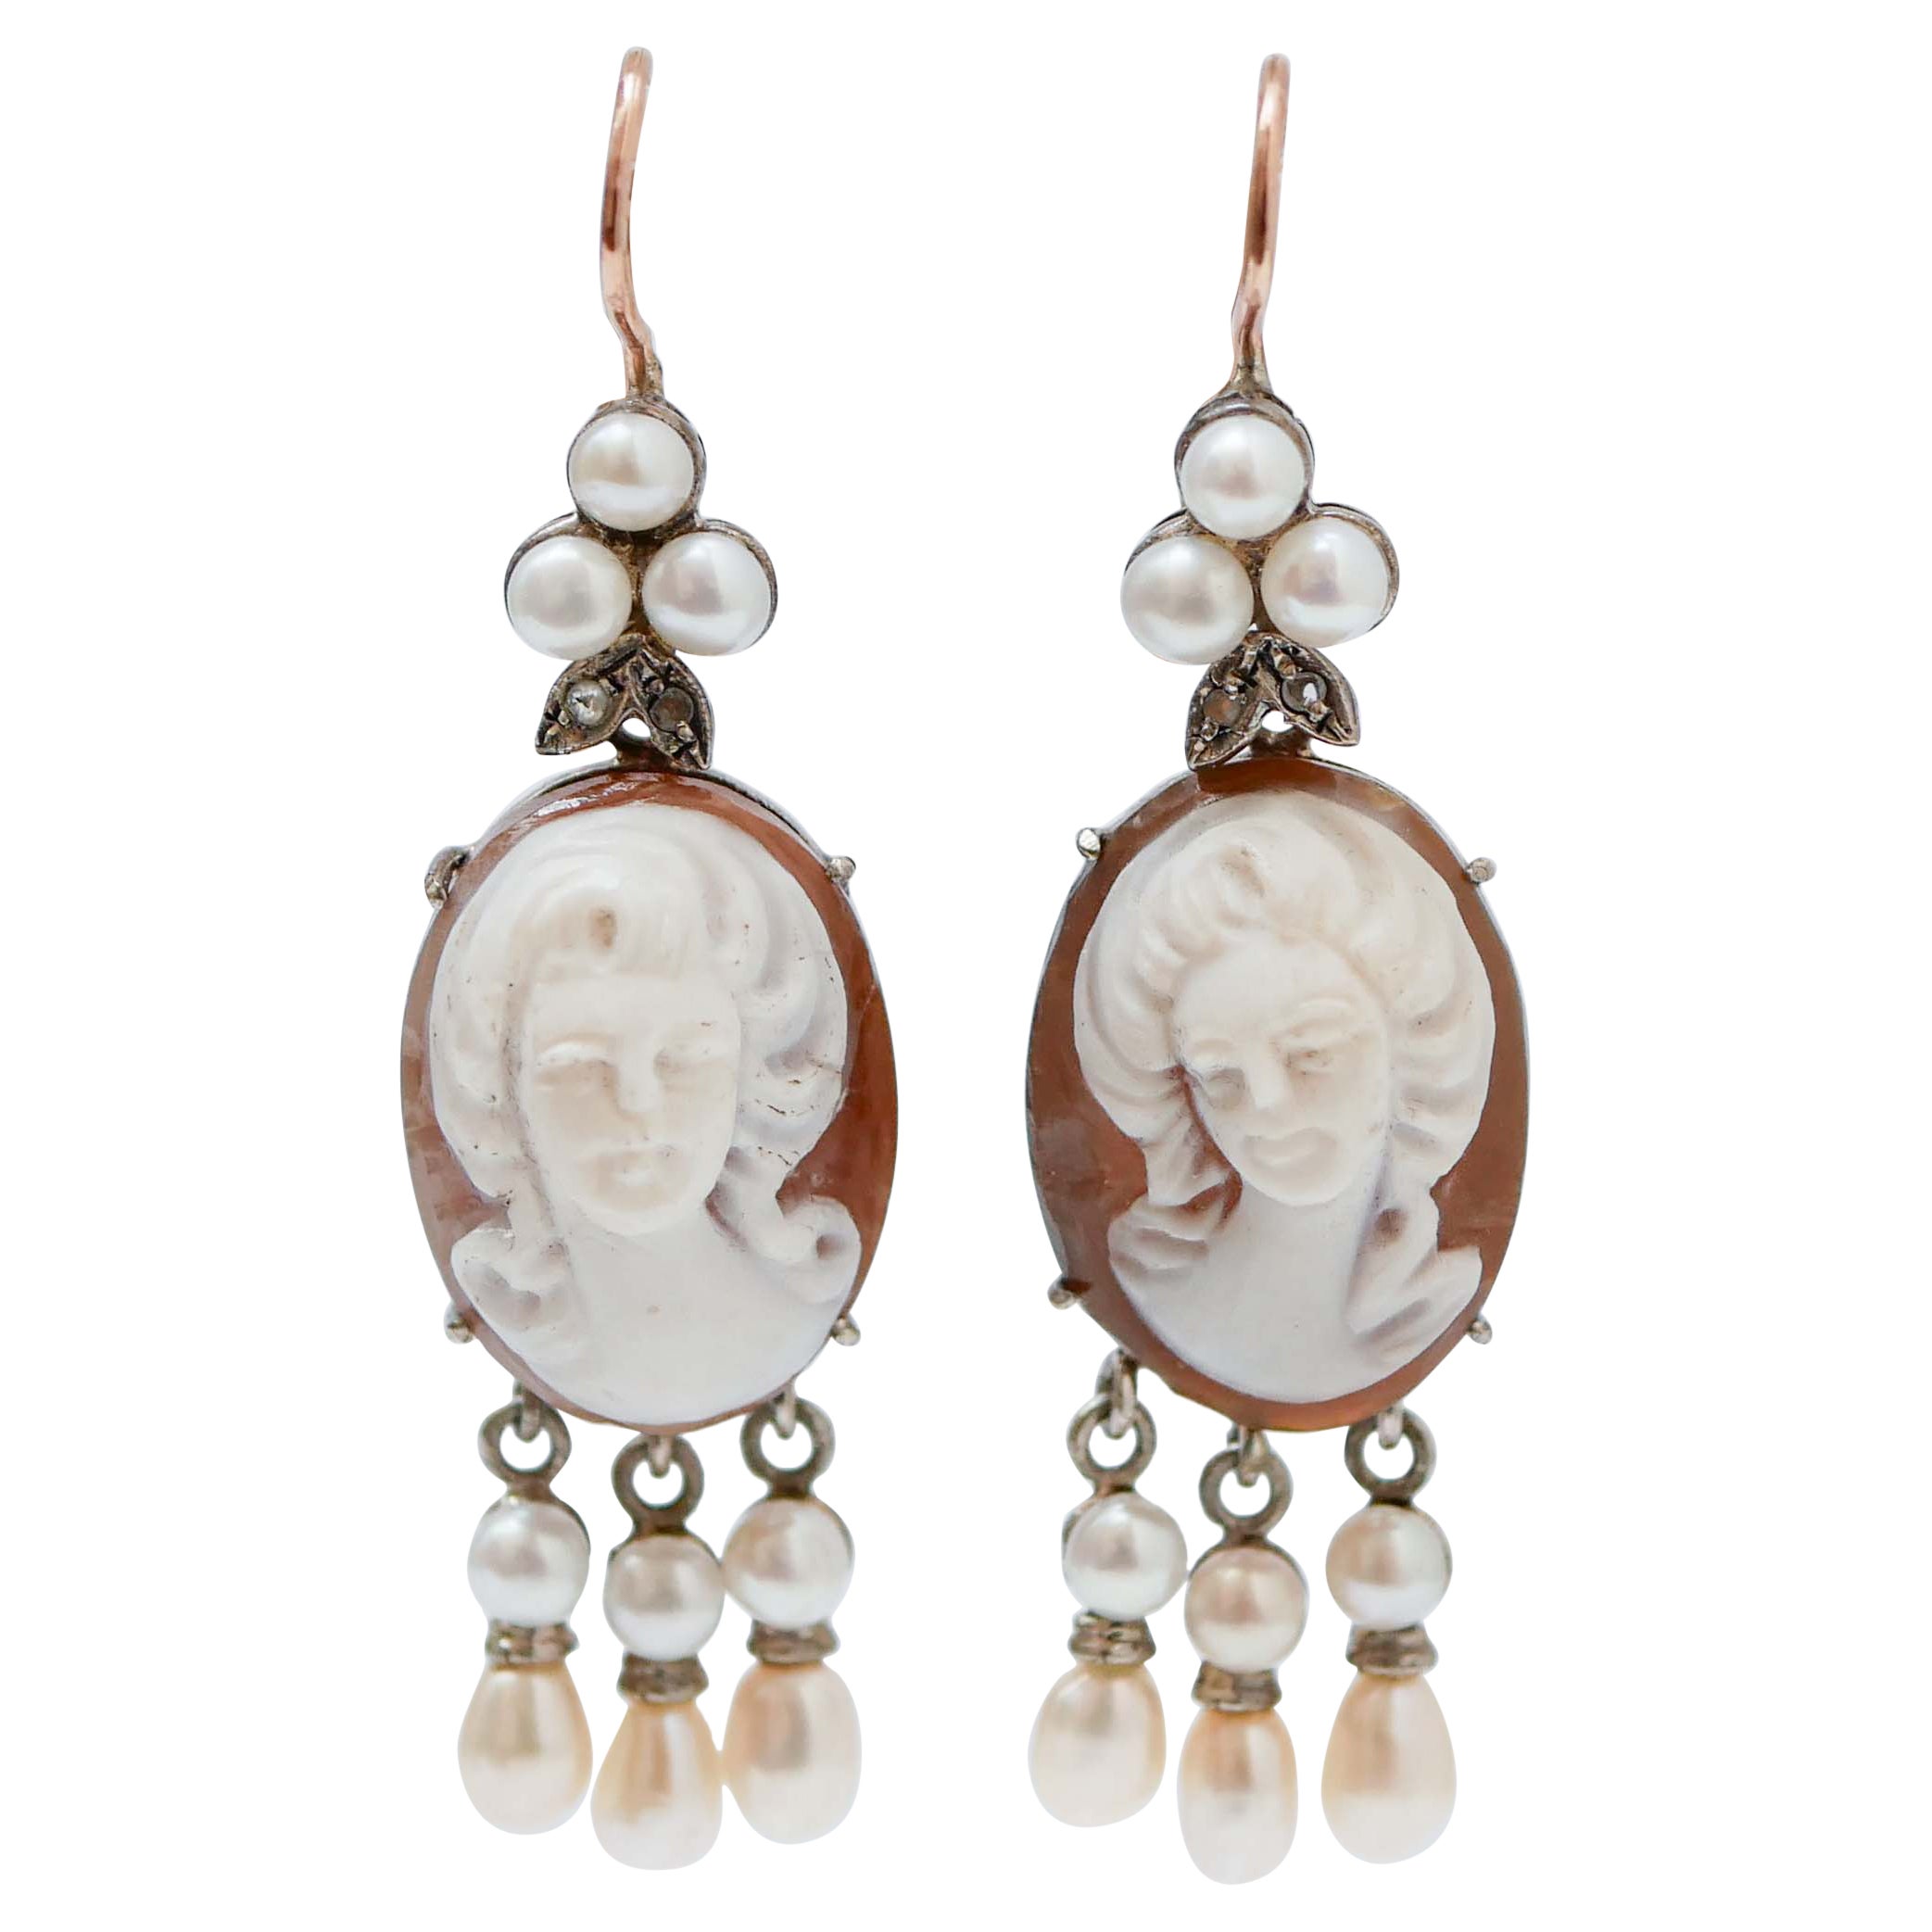 Cameo, Pearls, Diamonds, Rose Gold and Silver Retrò Earrings. For Sale